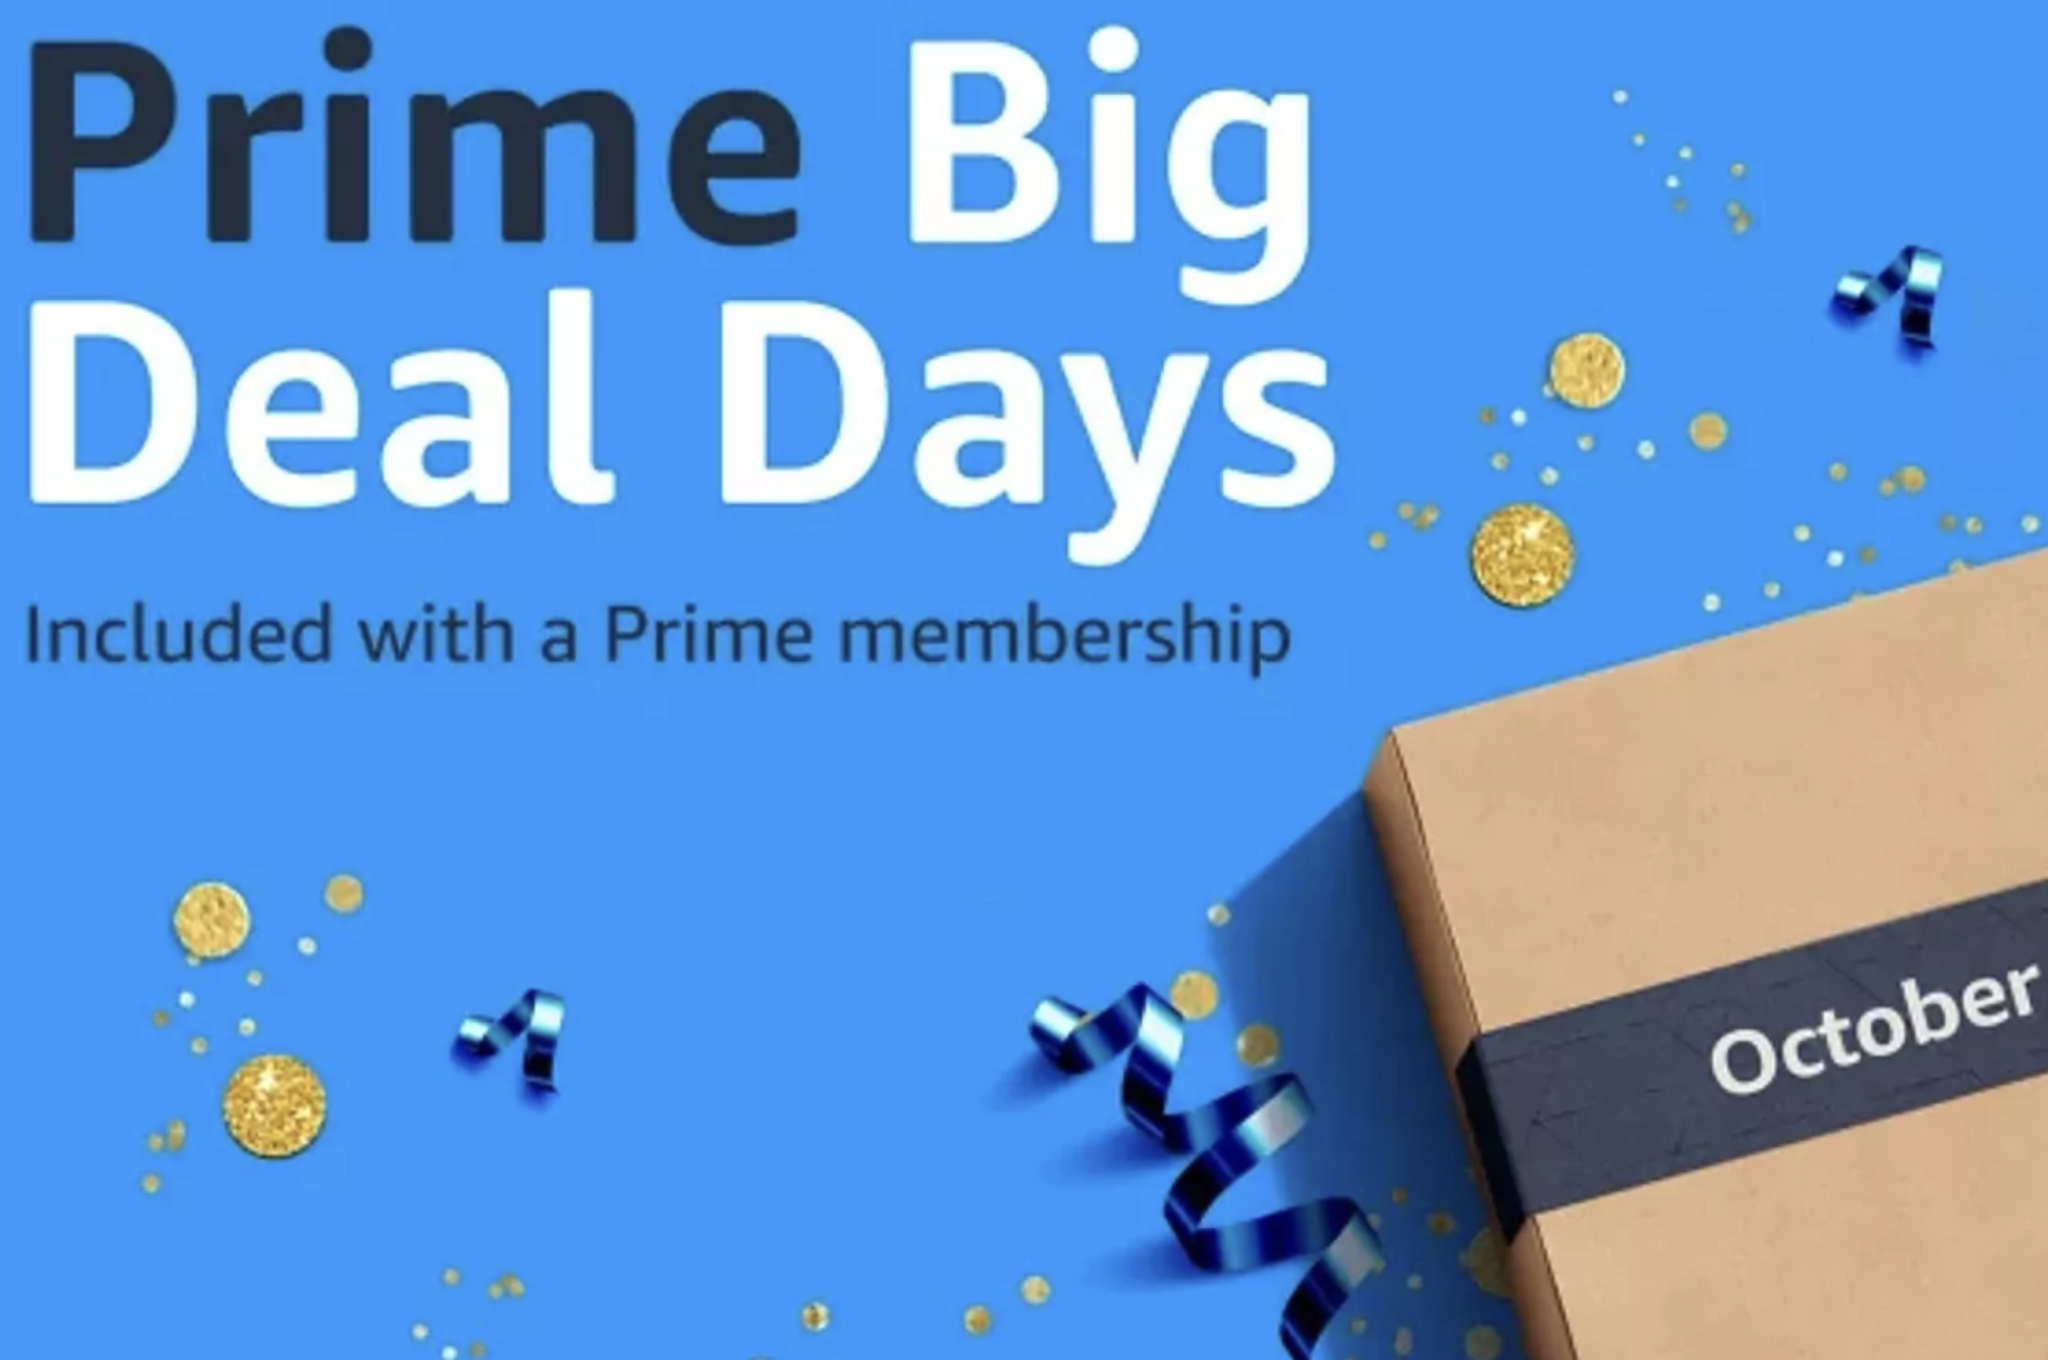 Prime Big Deal Days 2023: Here are some of the best deals on Amazon over the next two days